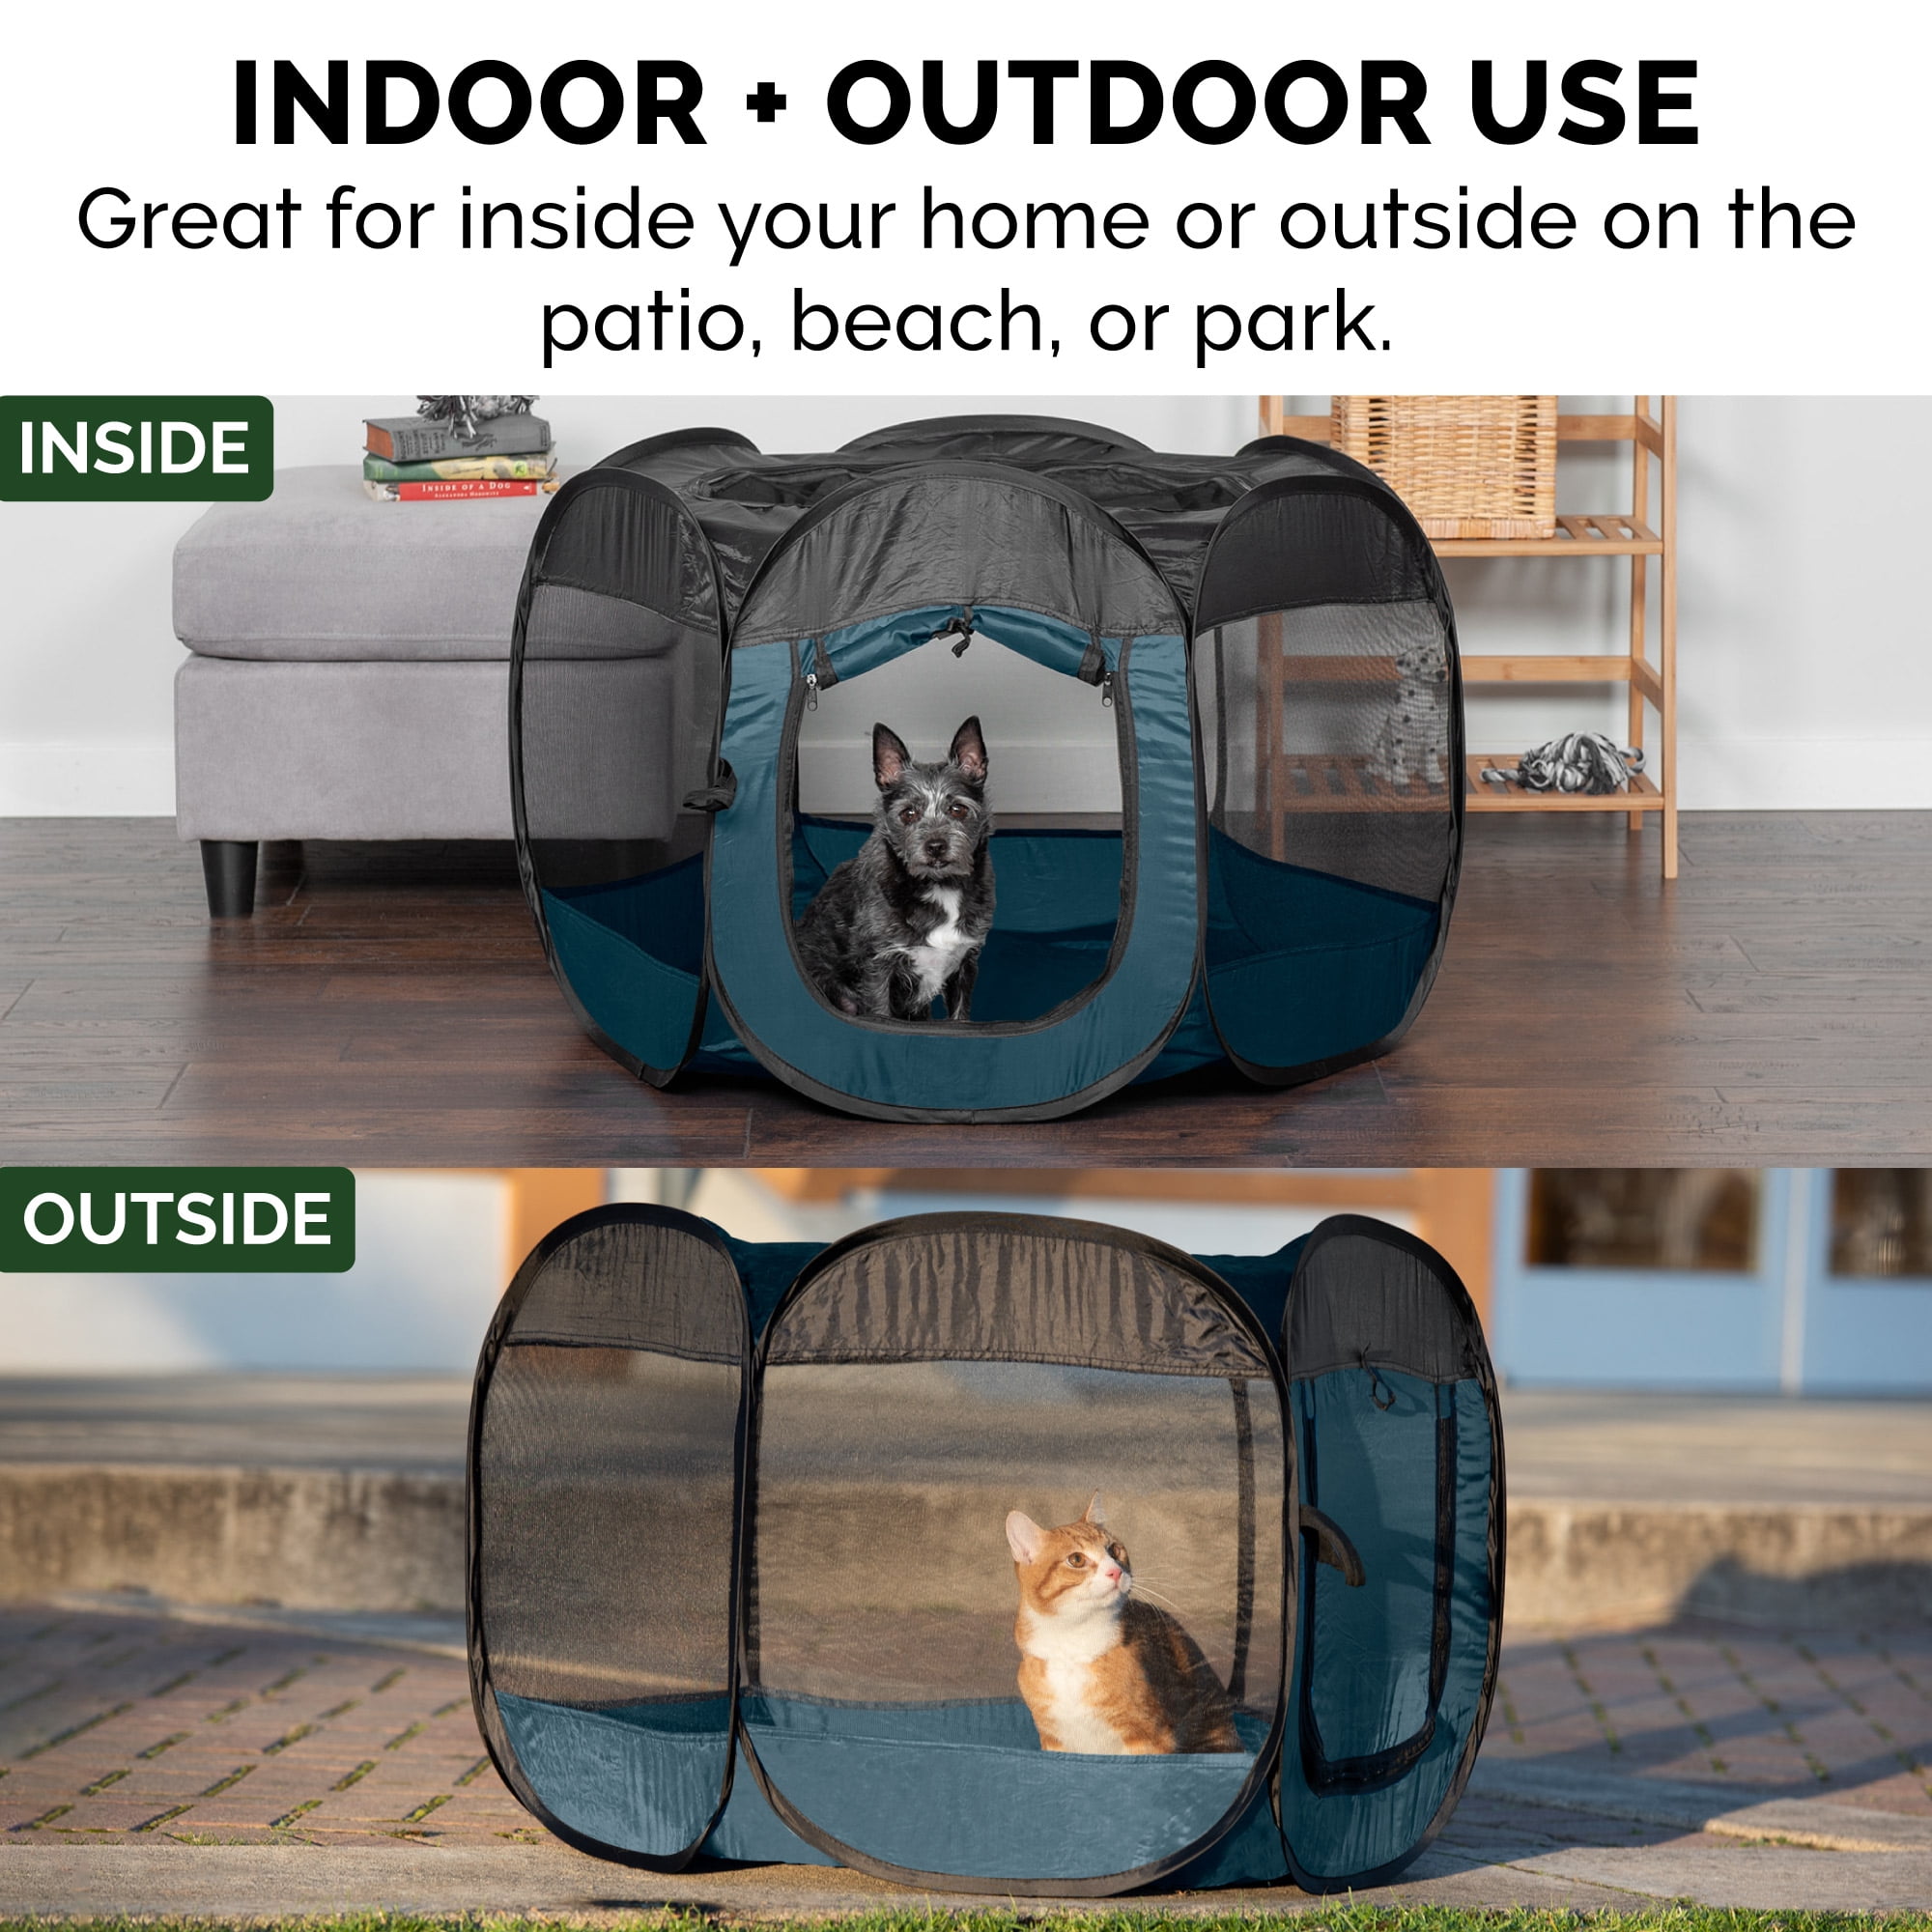 Thick Zippered Foldable Pet Playpen Animal Playpen Claw-Proof Mesh 23” Tall x 30” Wide Easyology Pet Playpen for Indoor Cats and Small Dogs Travel Cat Kennel/Cat Crate with 10 Second Setup 